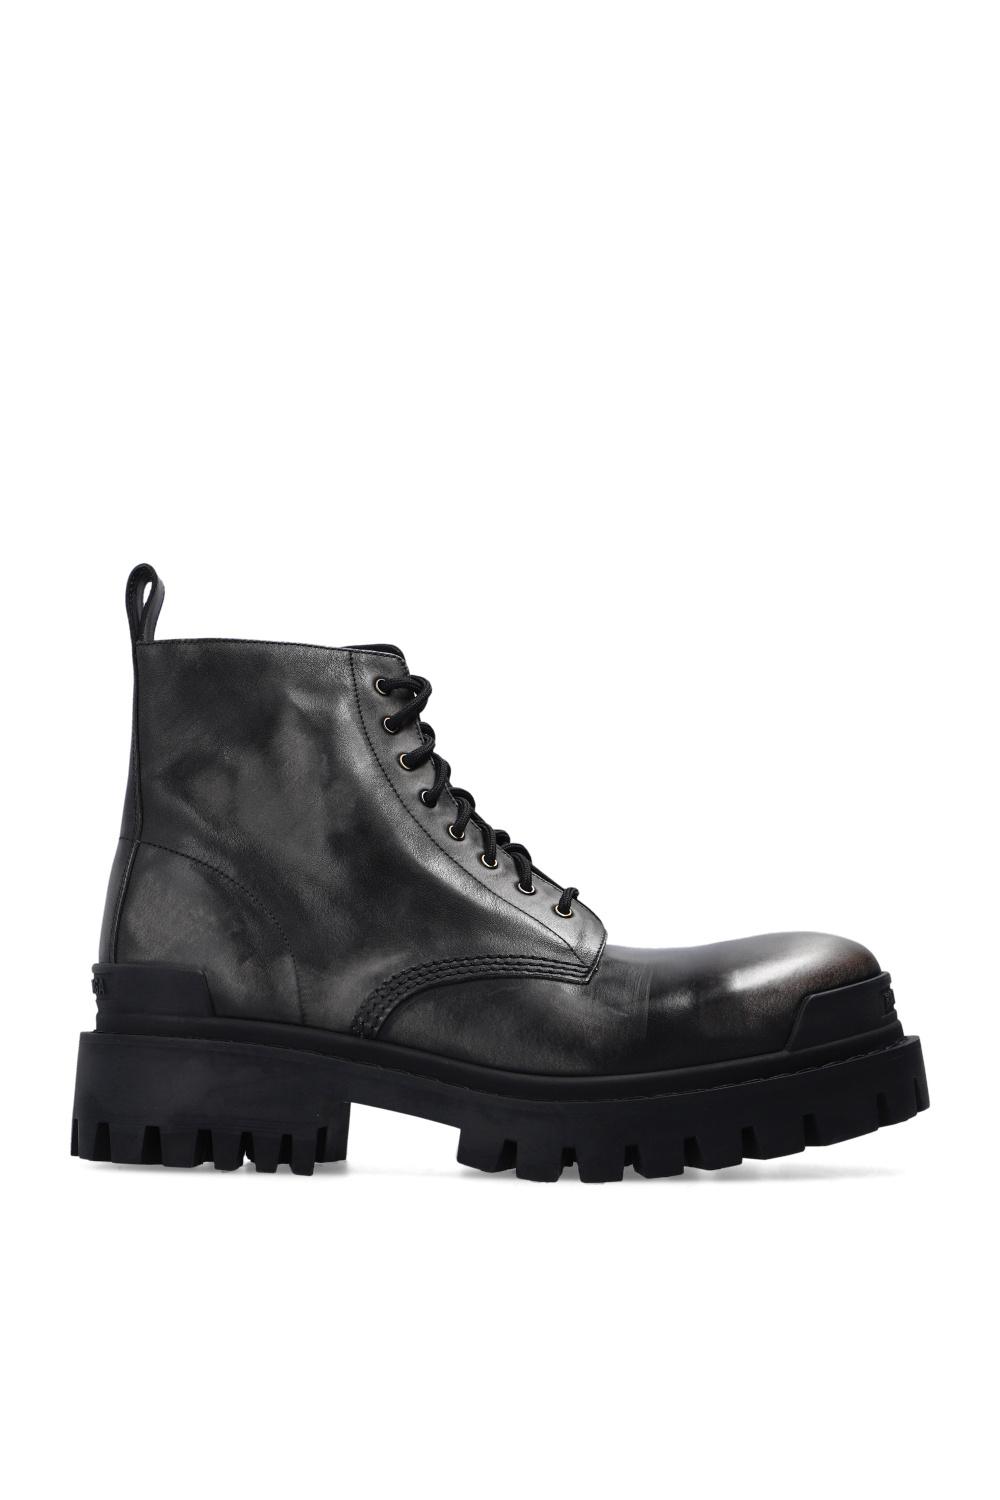 Balenciaga 'strike' Leather Ankle Boots in Black for Men | Lyst